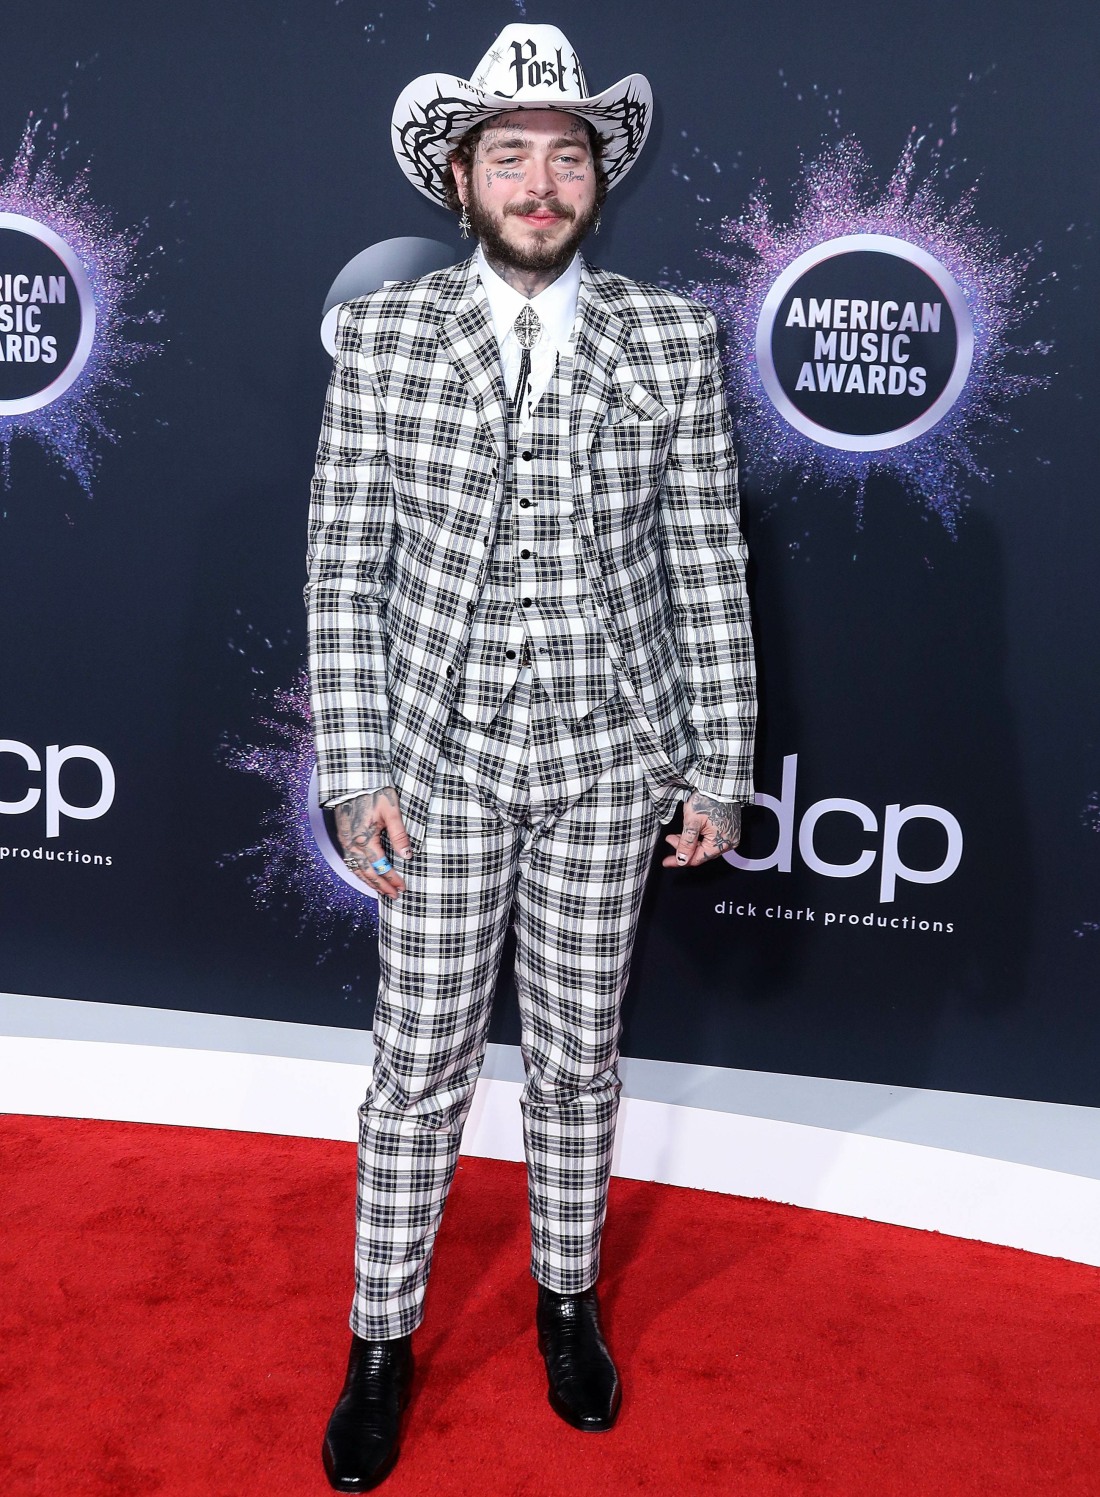 Rapper Post Malone wearing a Charbel Zoe dress arrives at the 2019 American Music Awards held at Microsoft Theatre L.A. Live on November 24, 2019 in Los Angeles, California, United States.